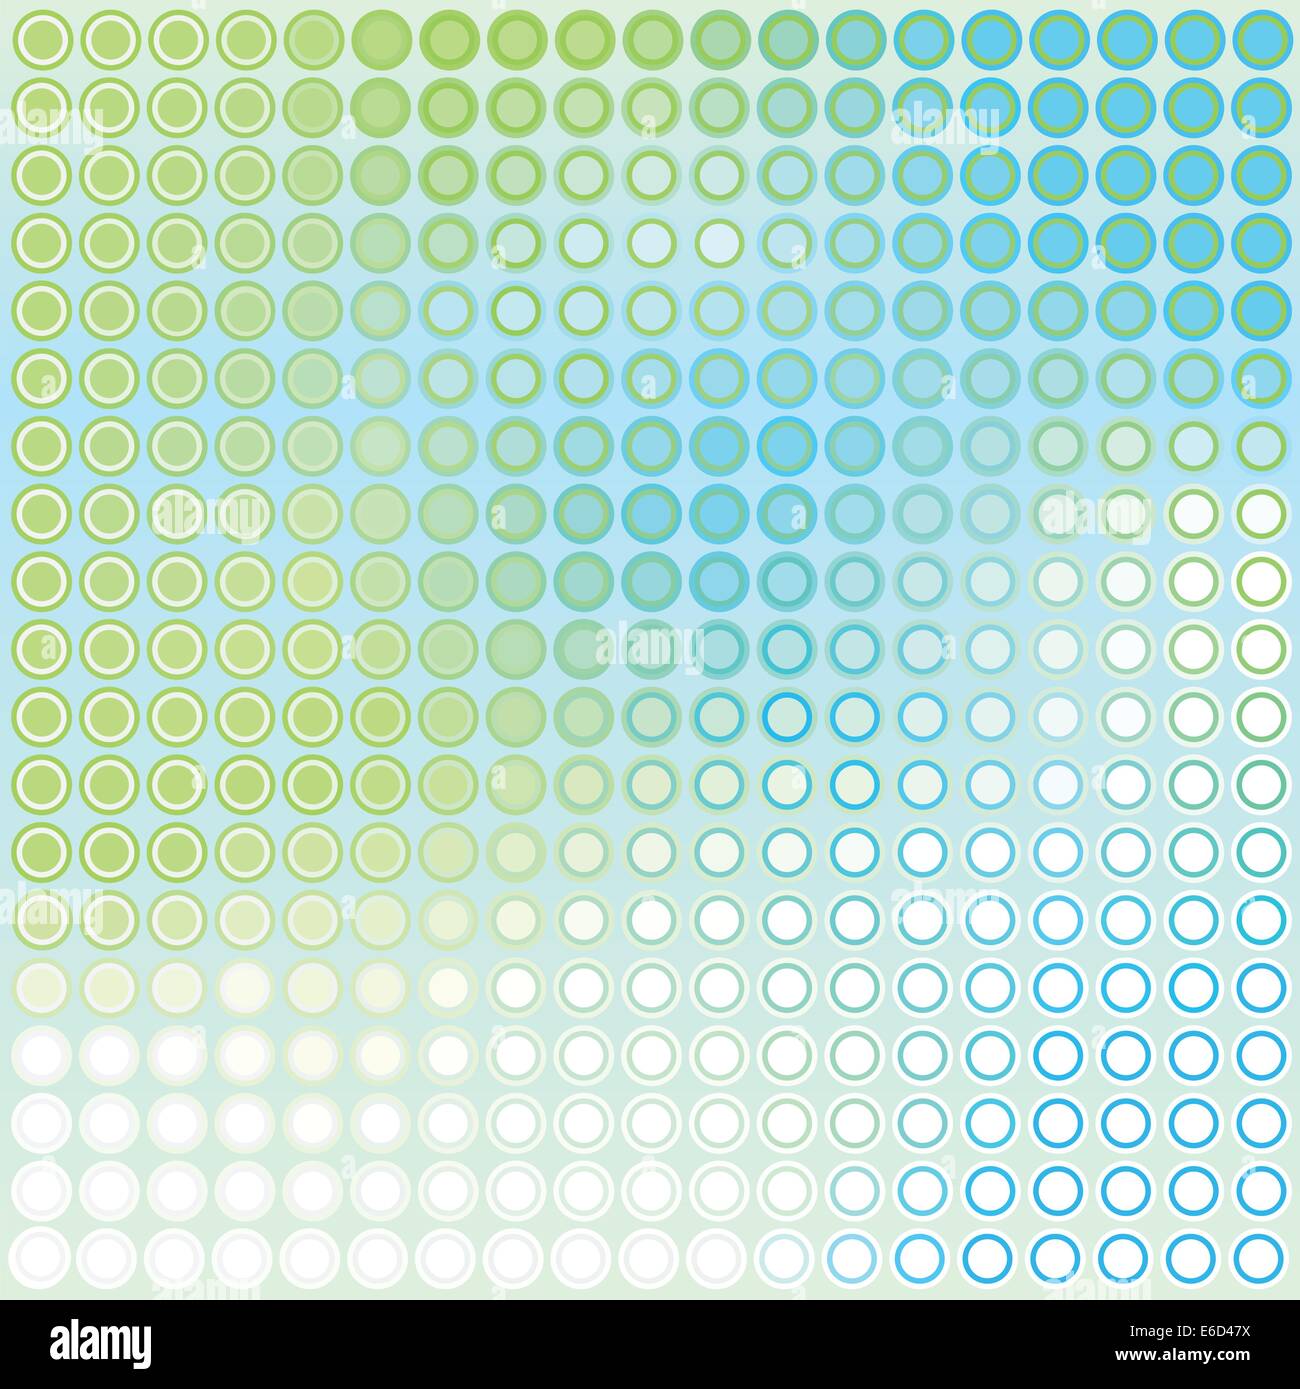 Abstract vector background of blue and green dots Stock Vector